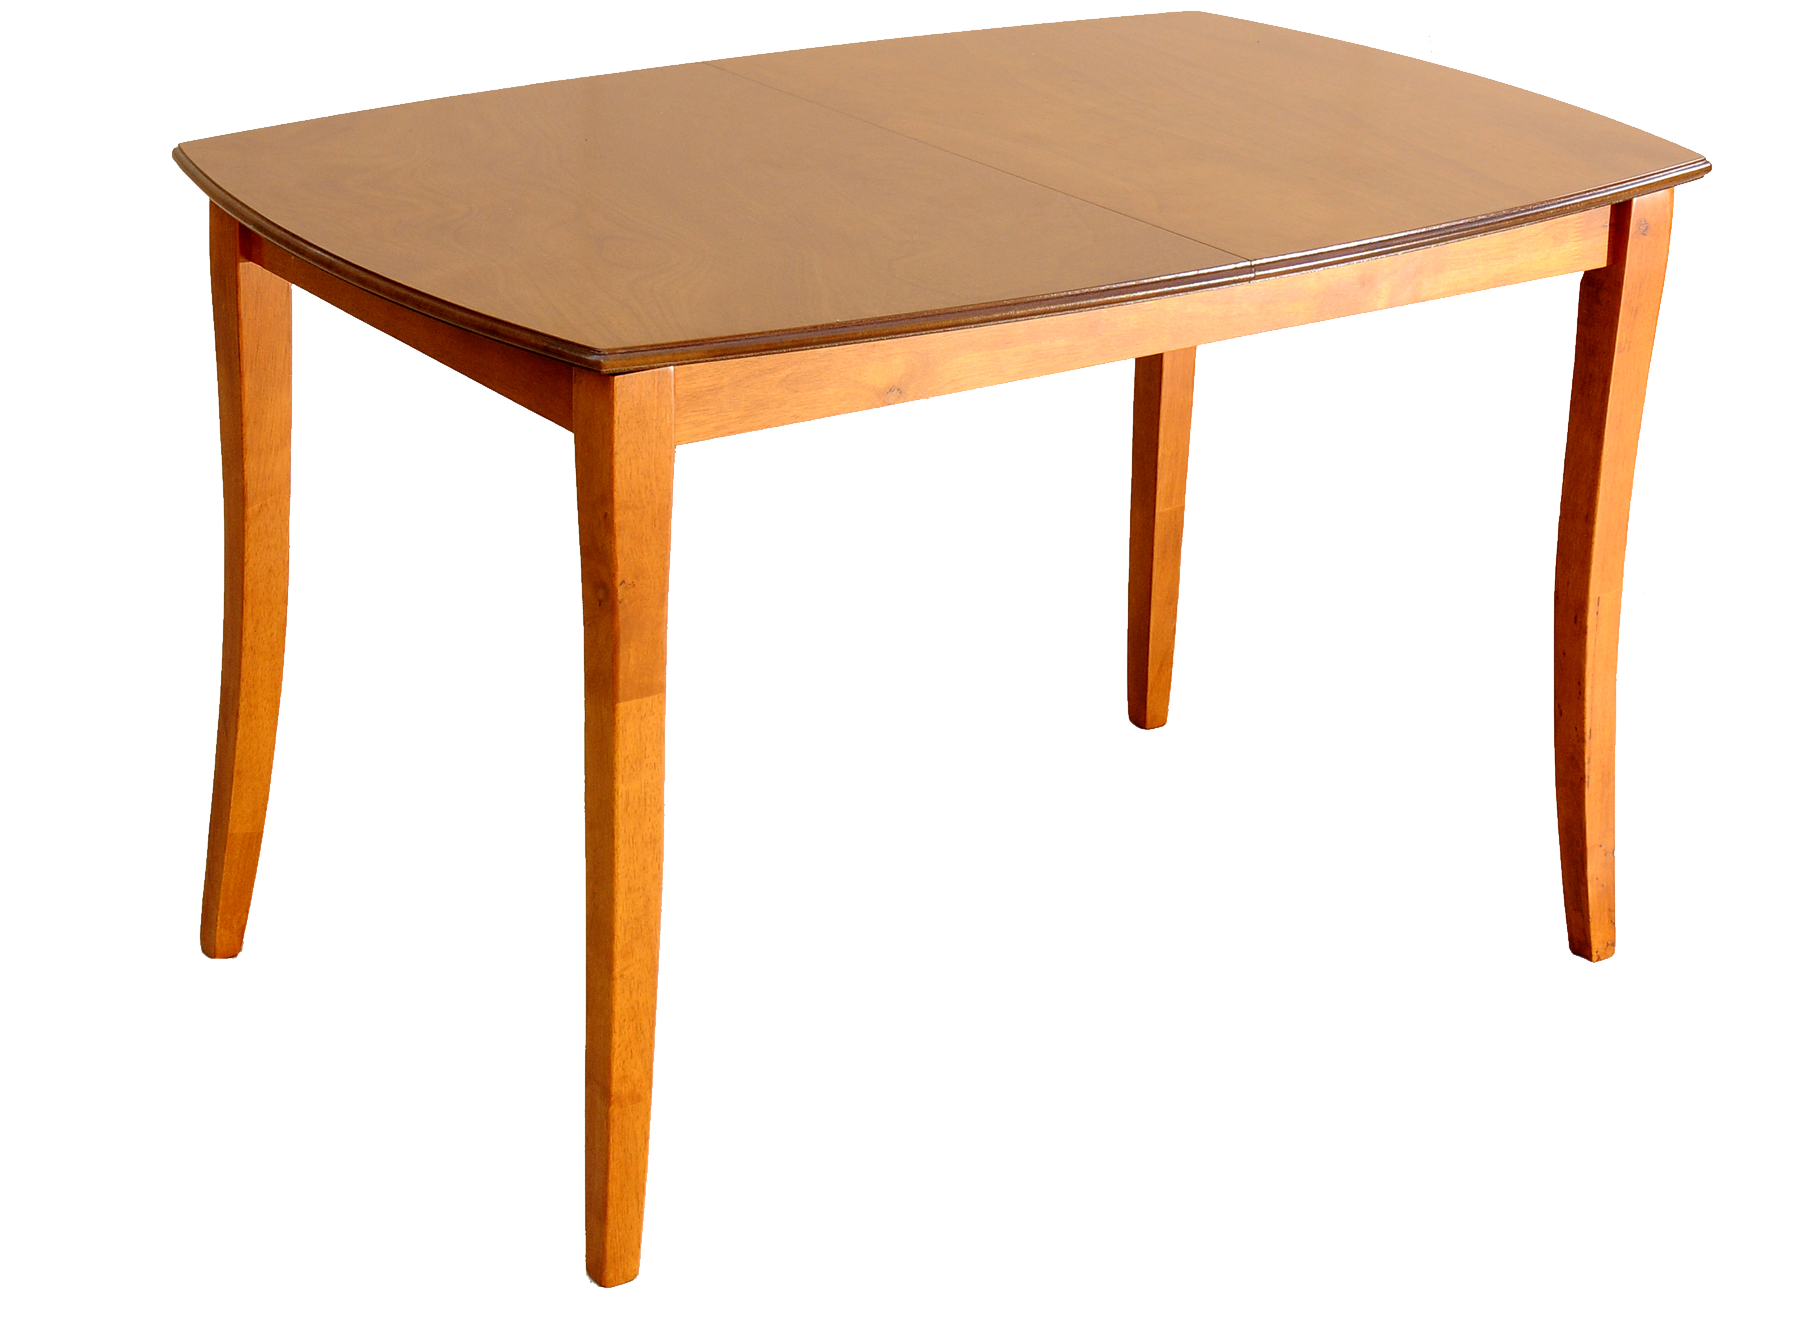 Tables at getdrawings com. Cleaning clipart clean dinner table